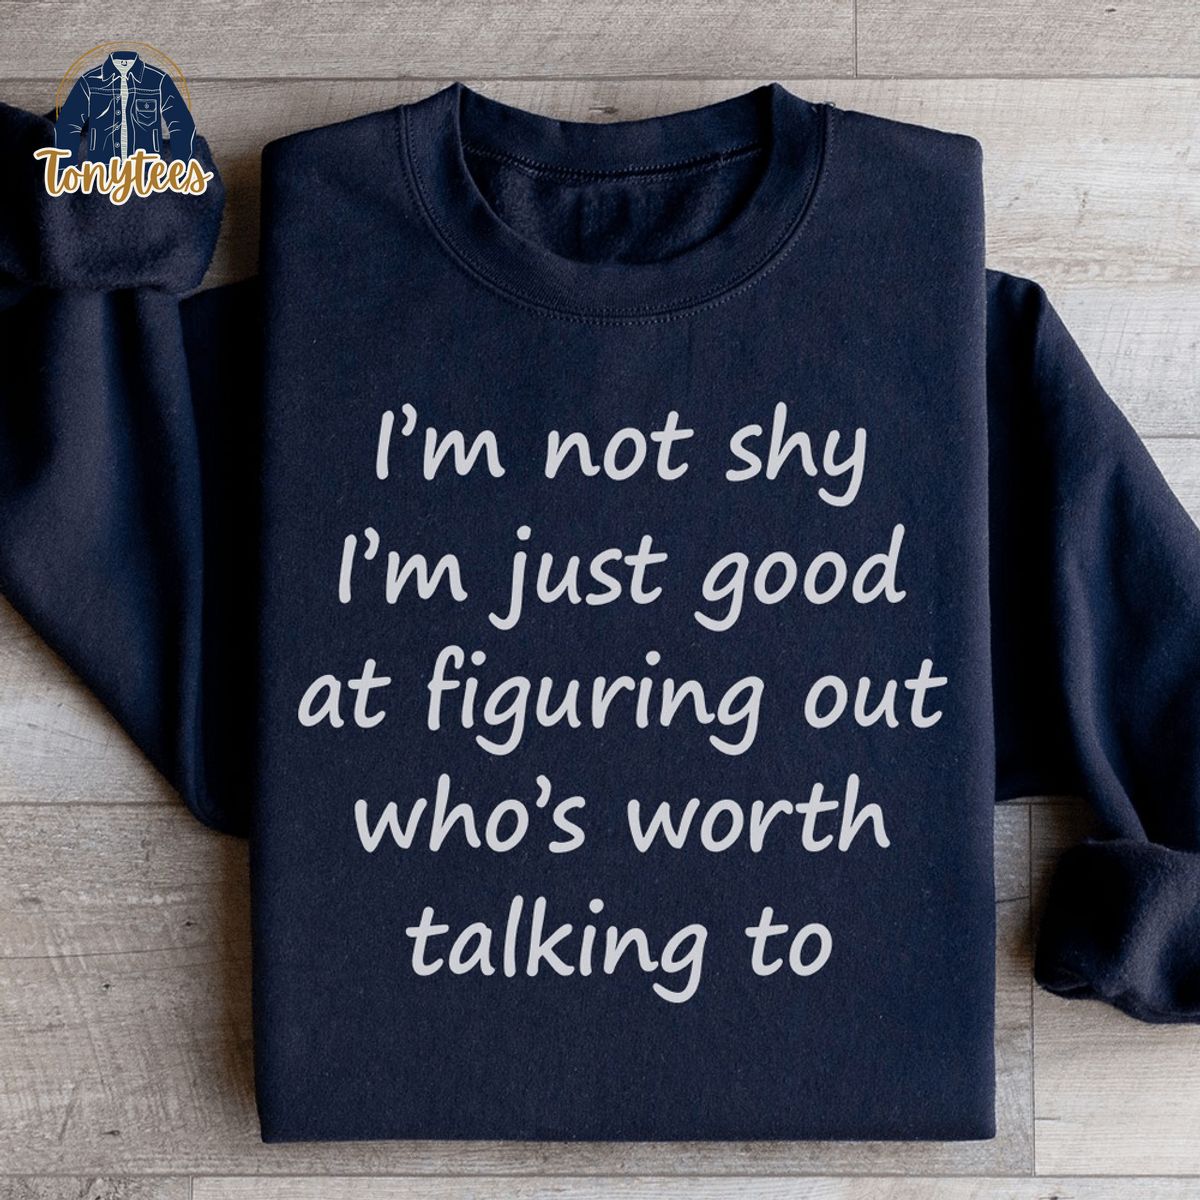 I’m not shy I’m just good at figuring out who’s worth talking to shirt